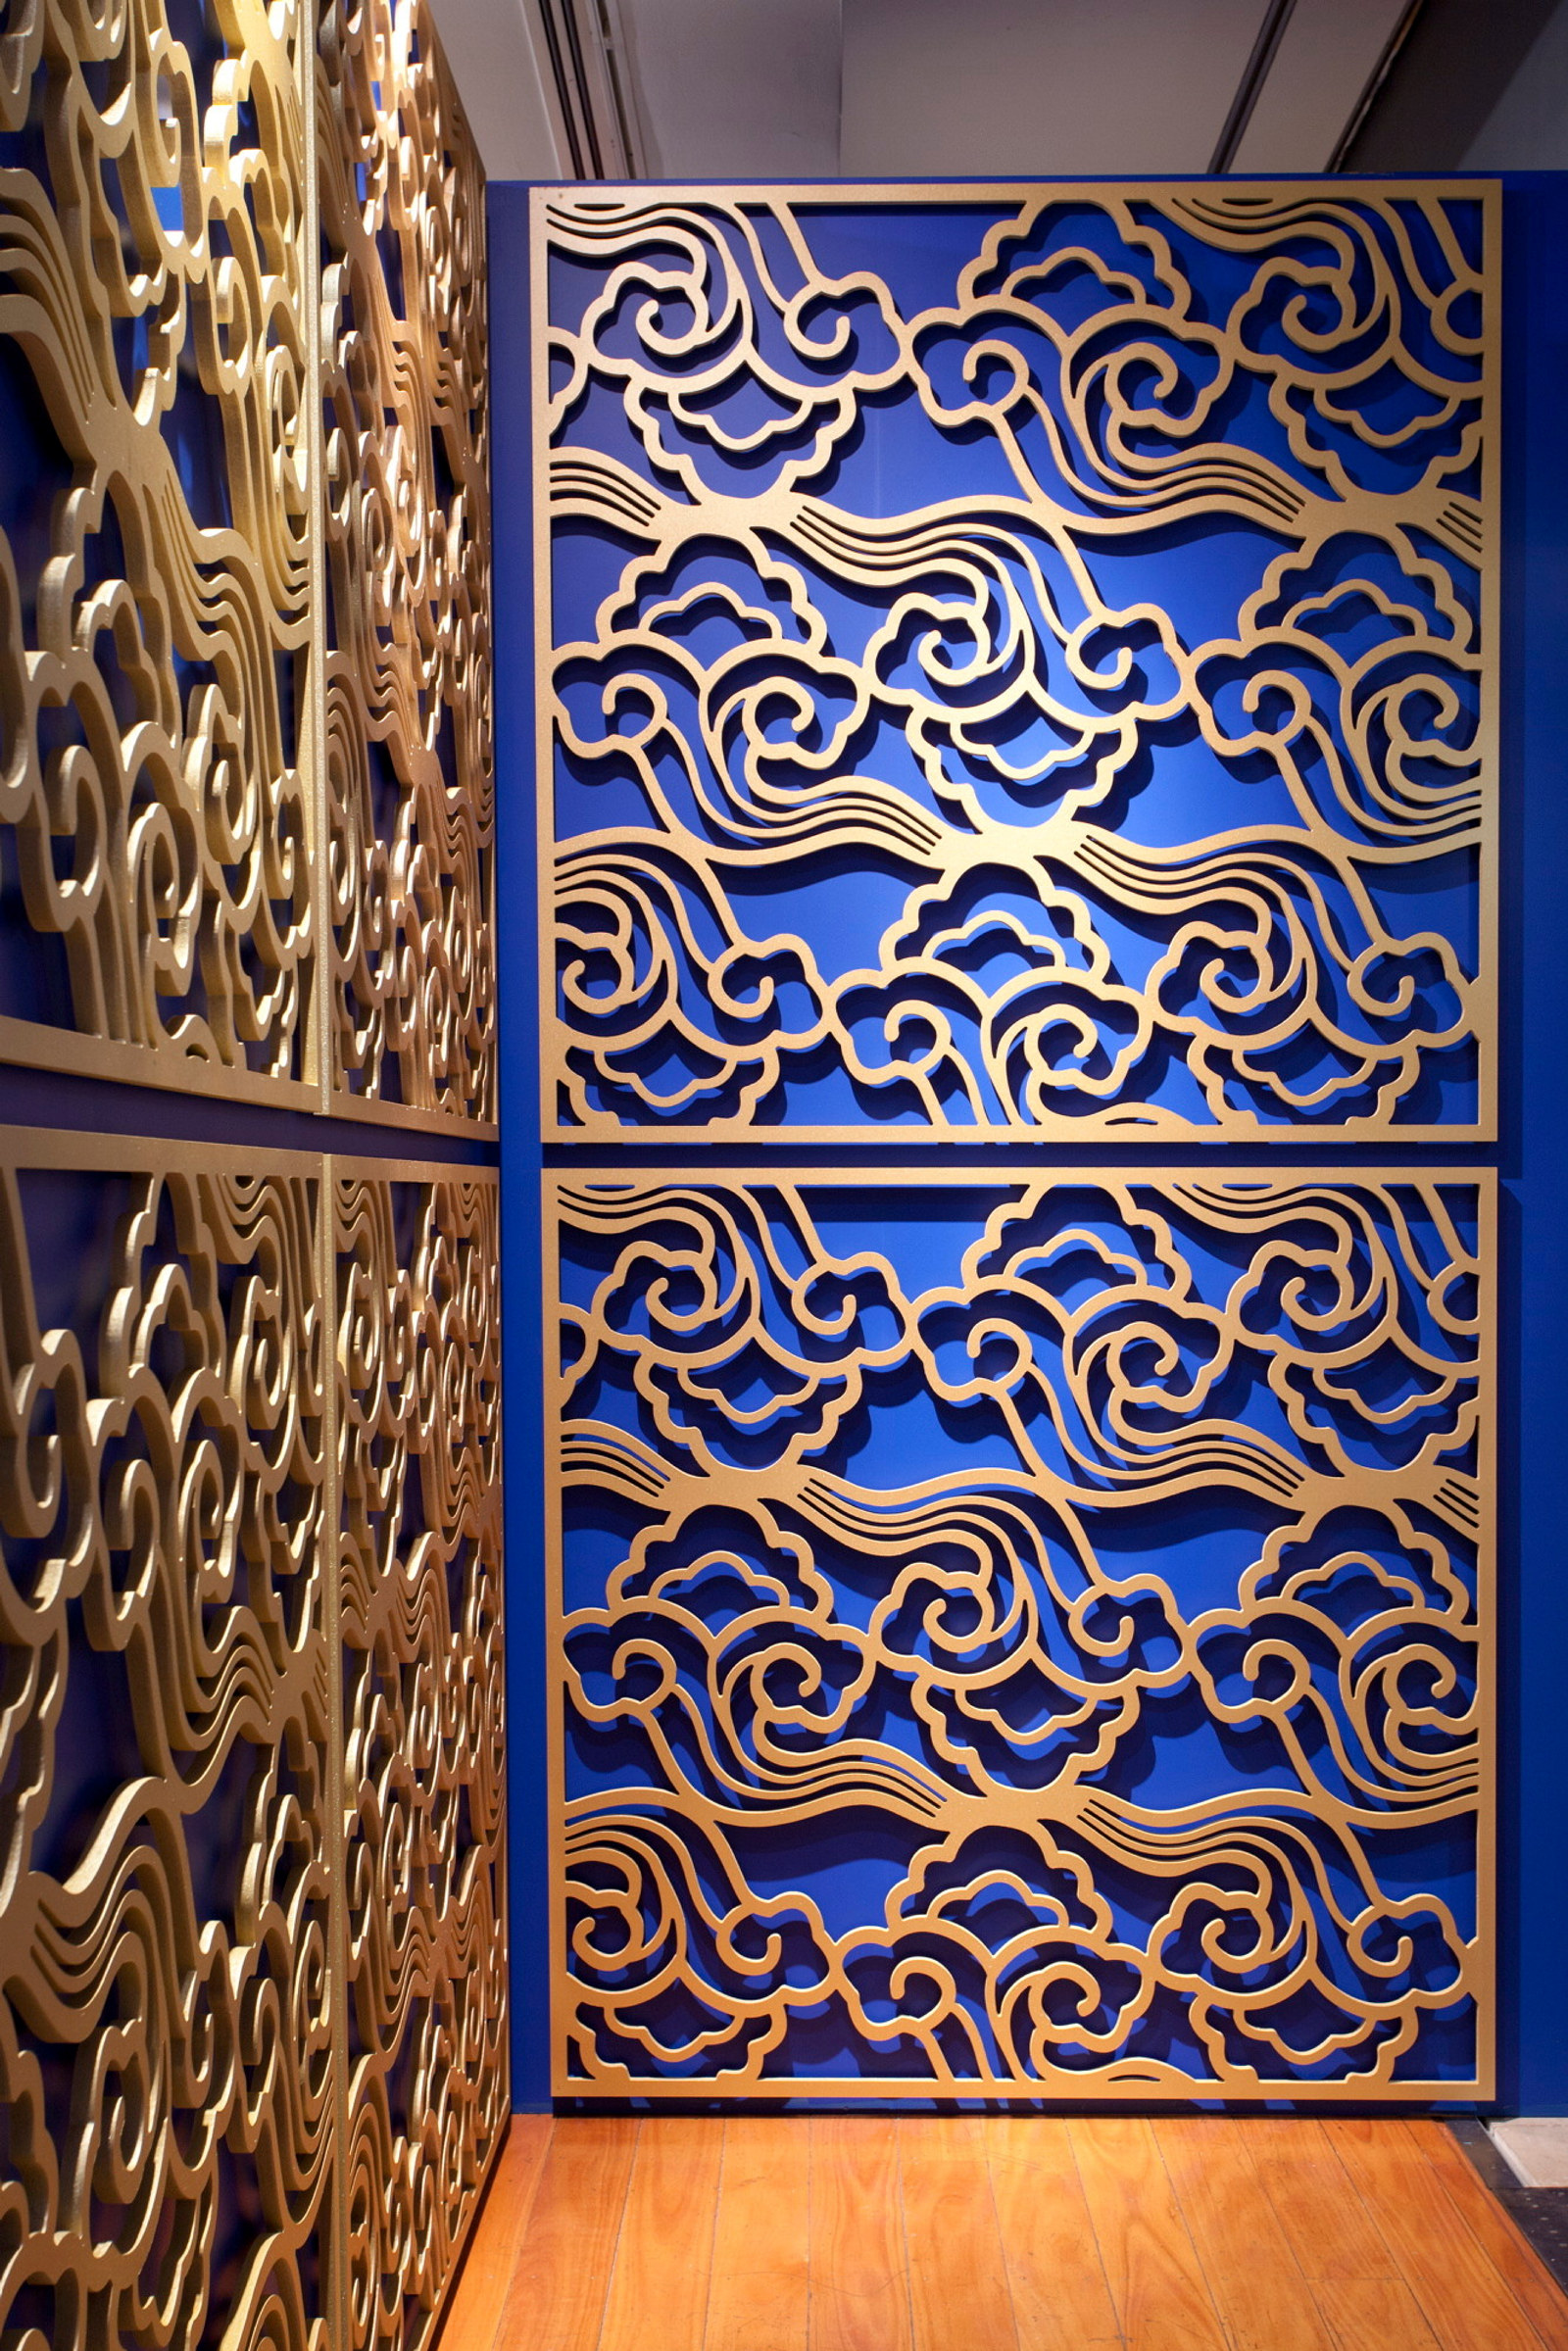 This is a photograph of gold painted cut-out panels featuring a cloud pattern on a blue wall